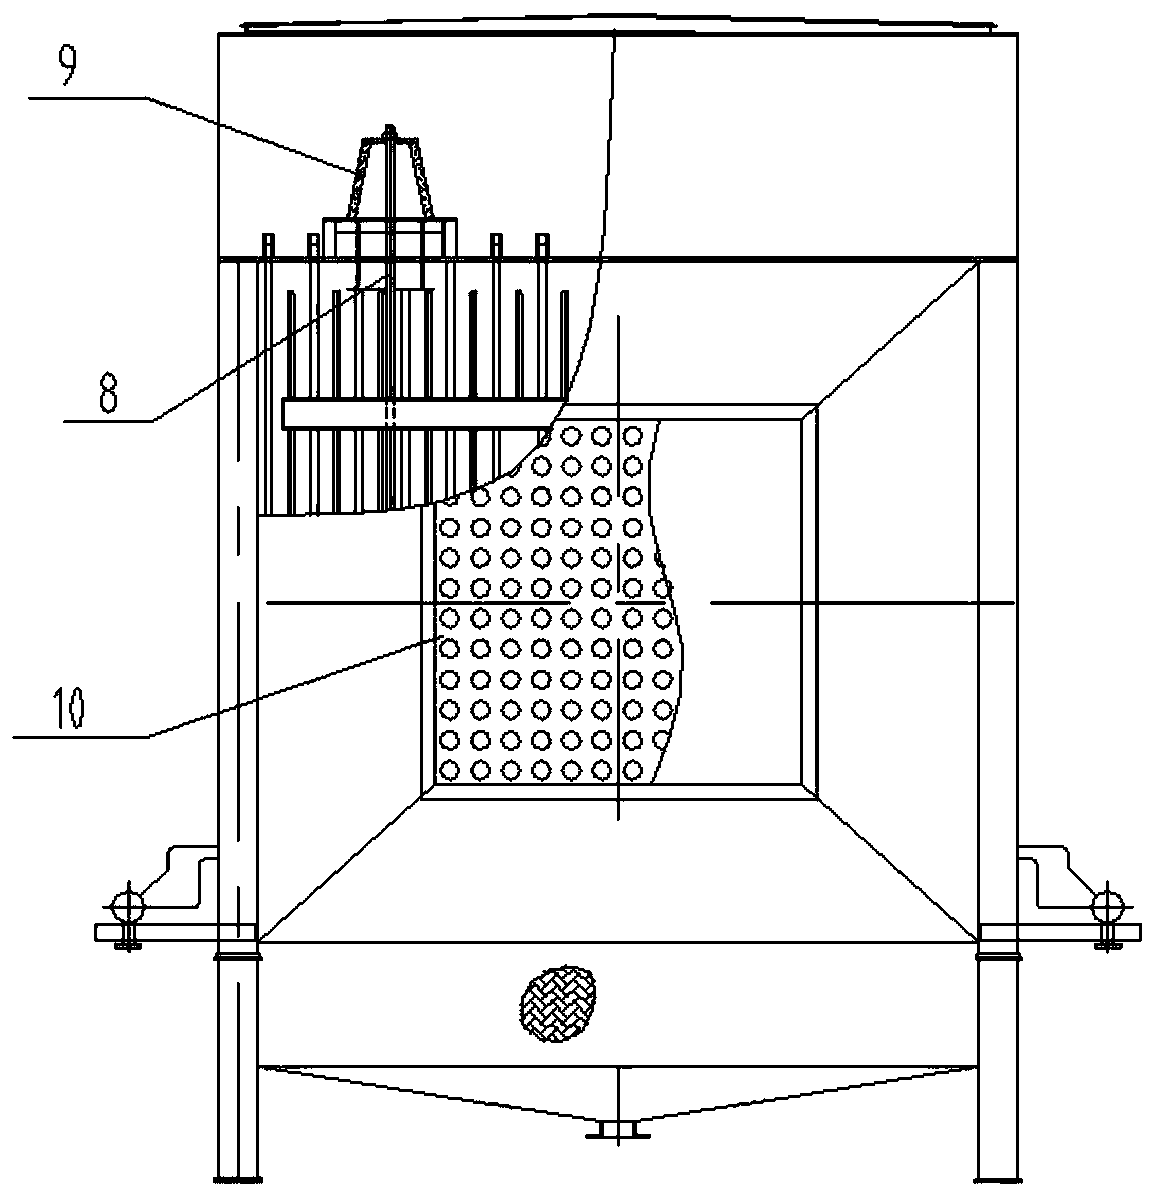 Discharge condensation water collection system for collaborative removal of pollutants